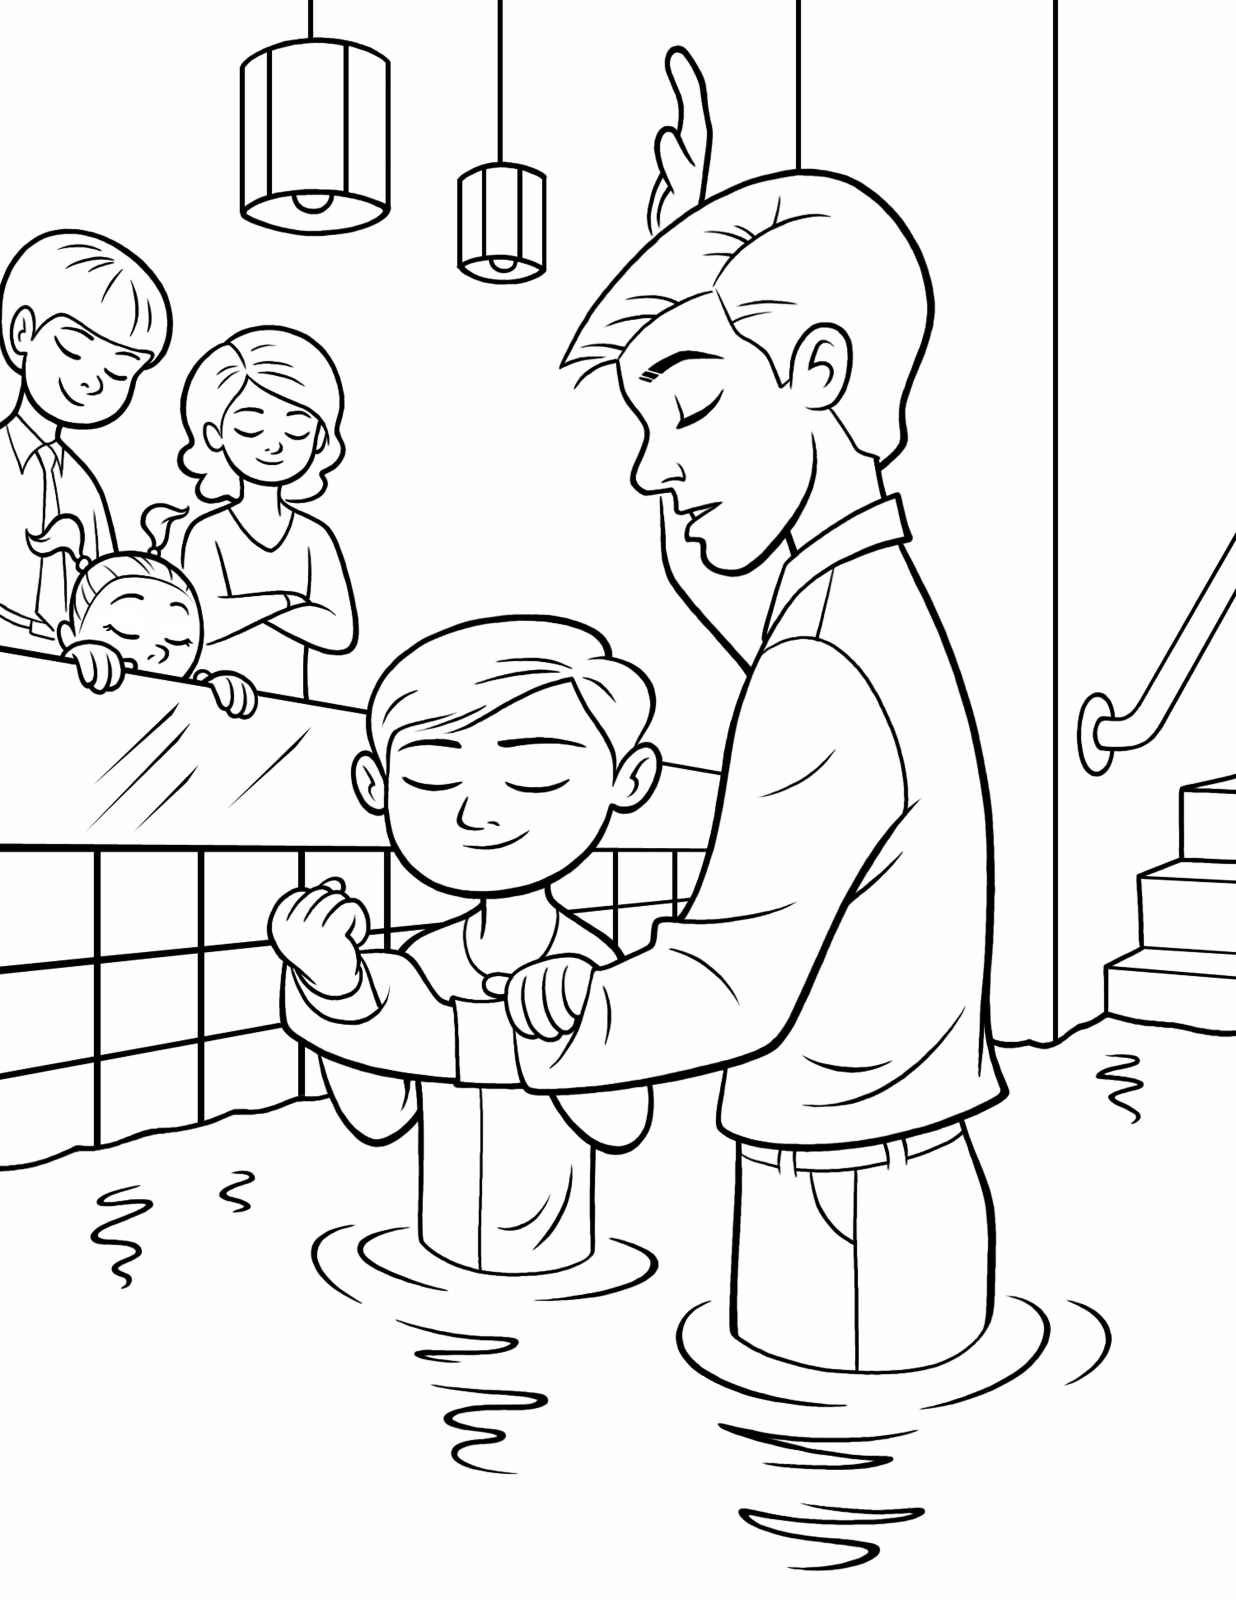 Baptism Coloring Pages Printable Pdf - Baptism Coloring Pages Free